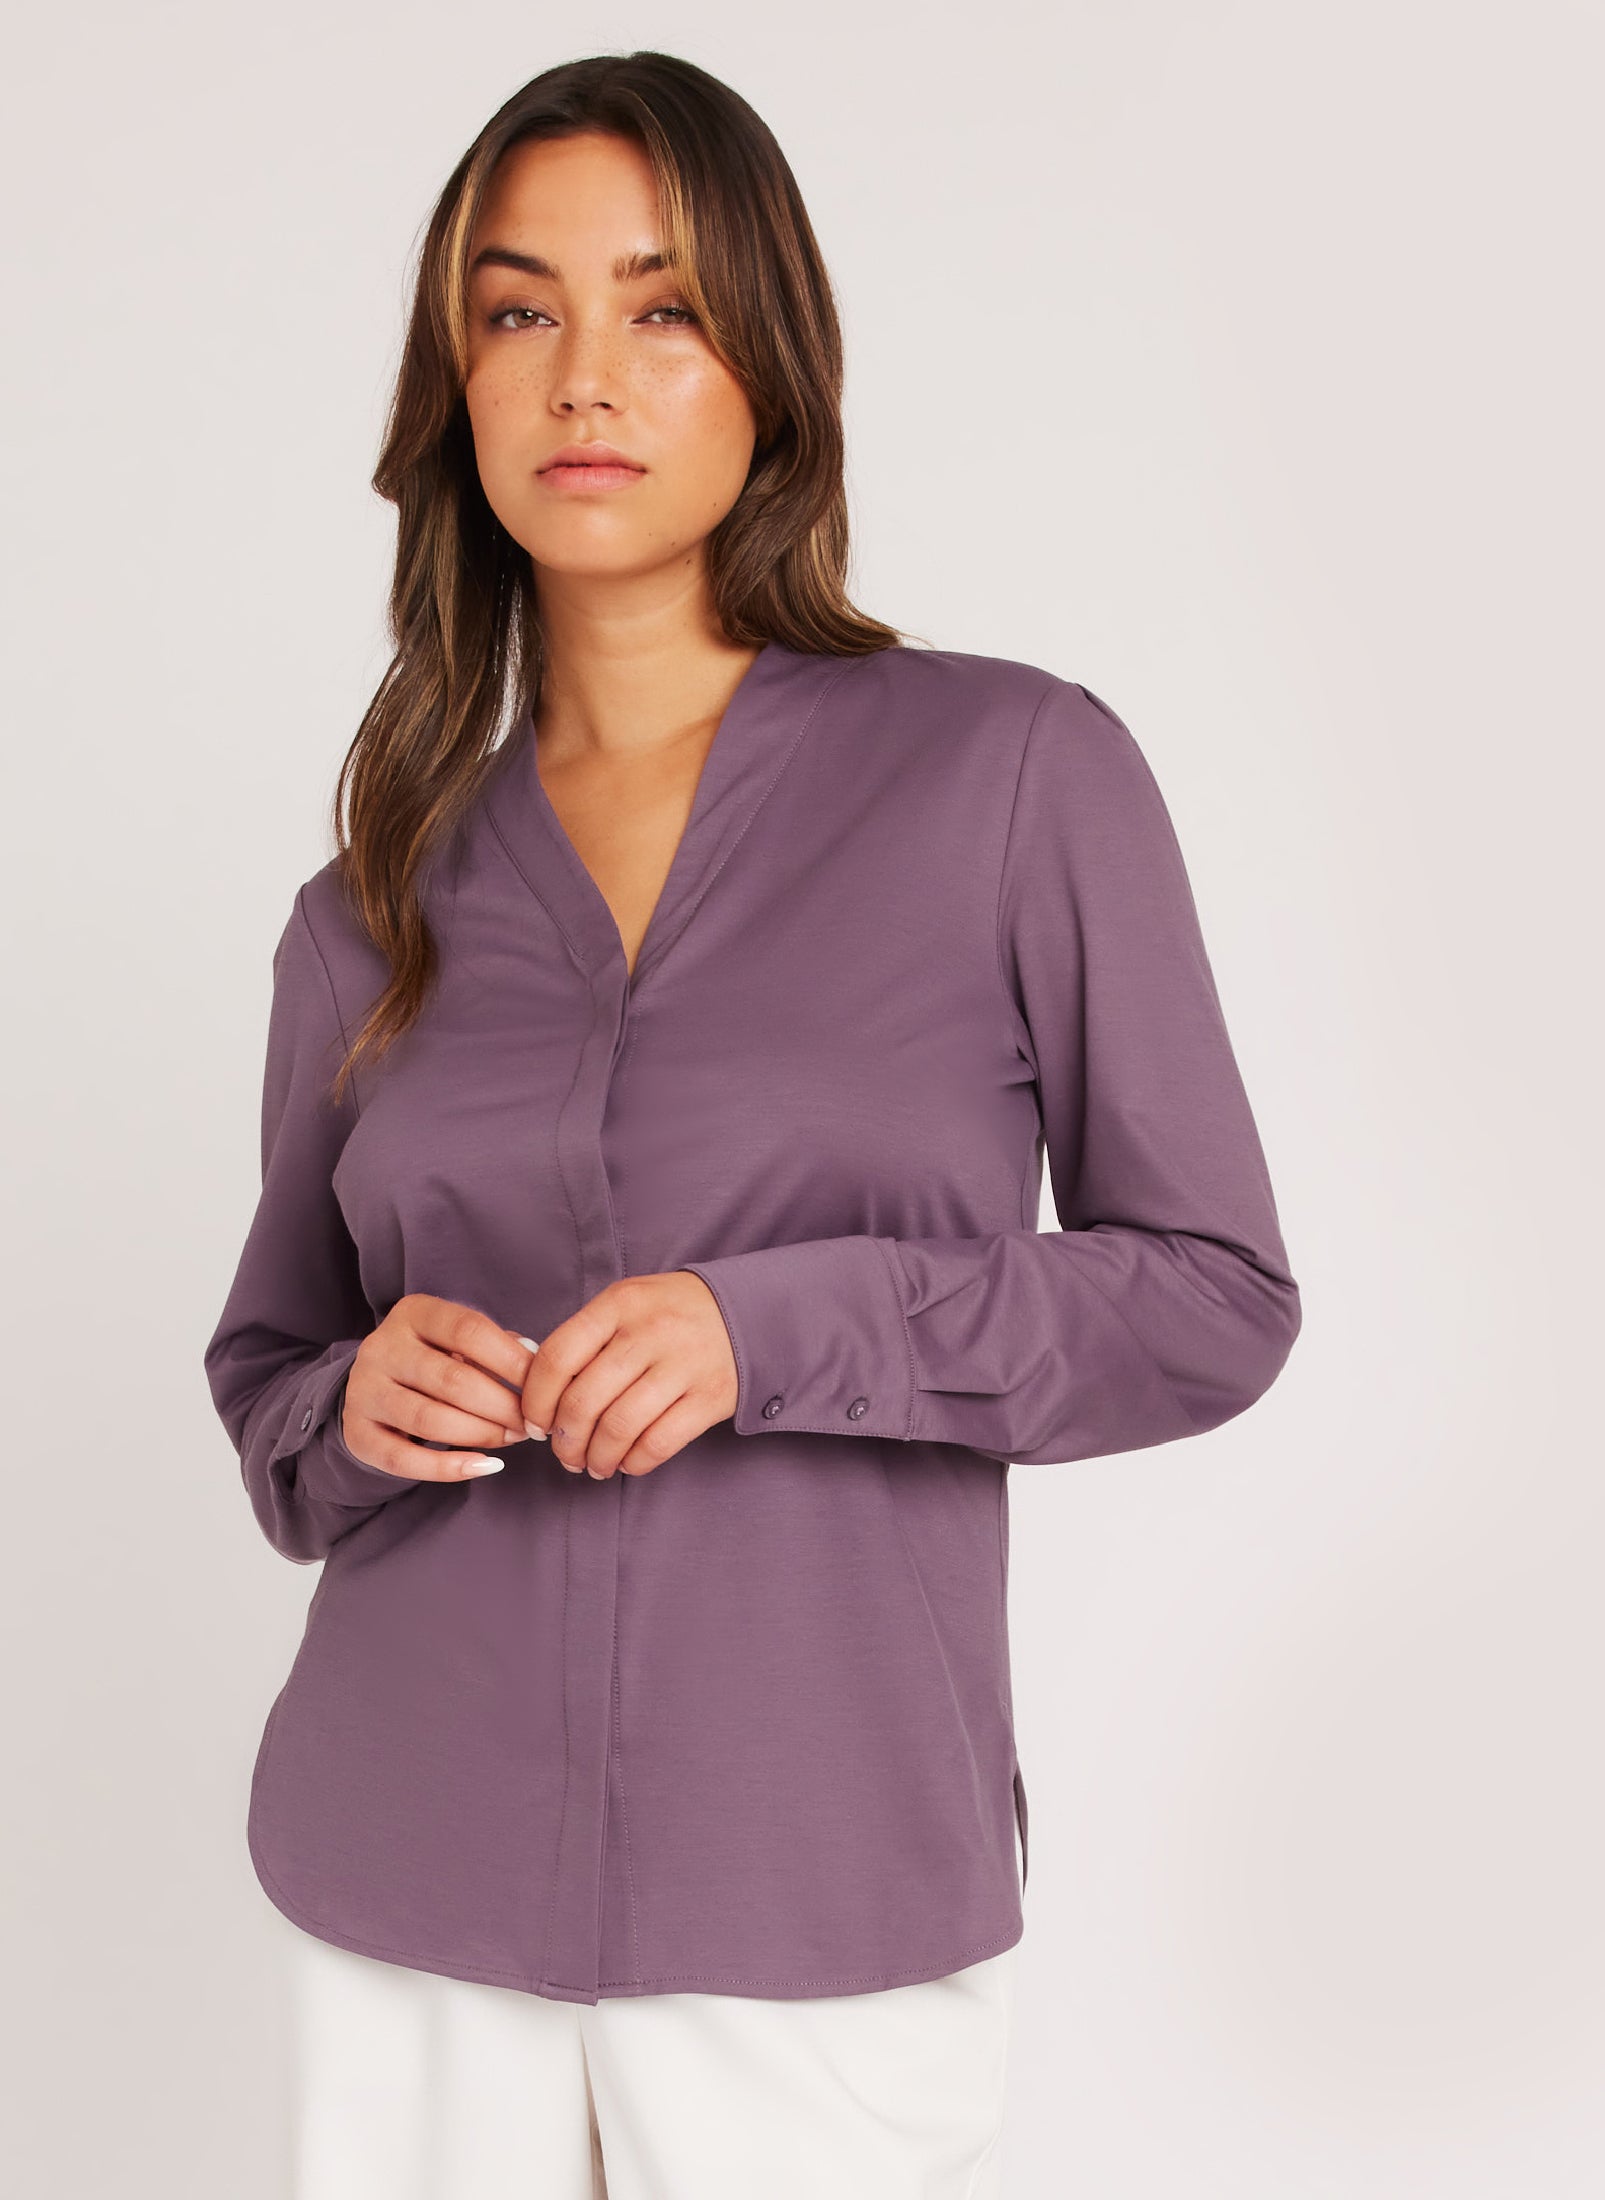 Women's Long Sleeve Shirts, Explore our New Arrivals